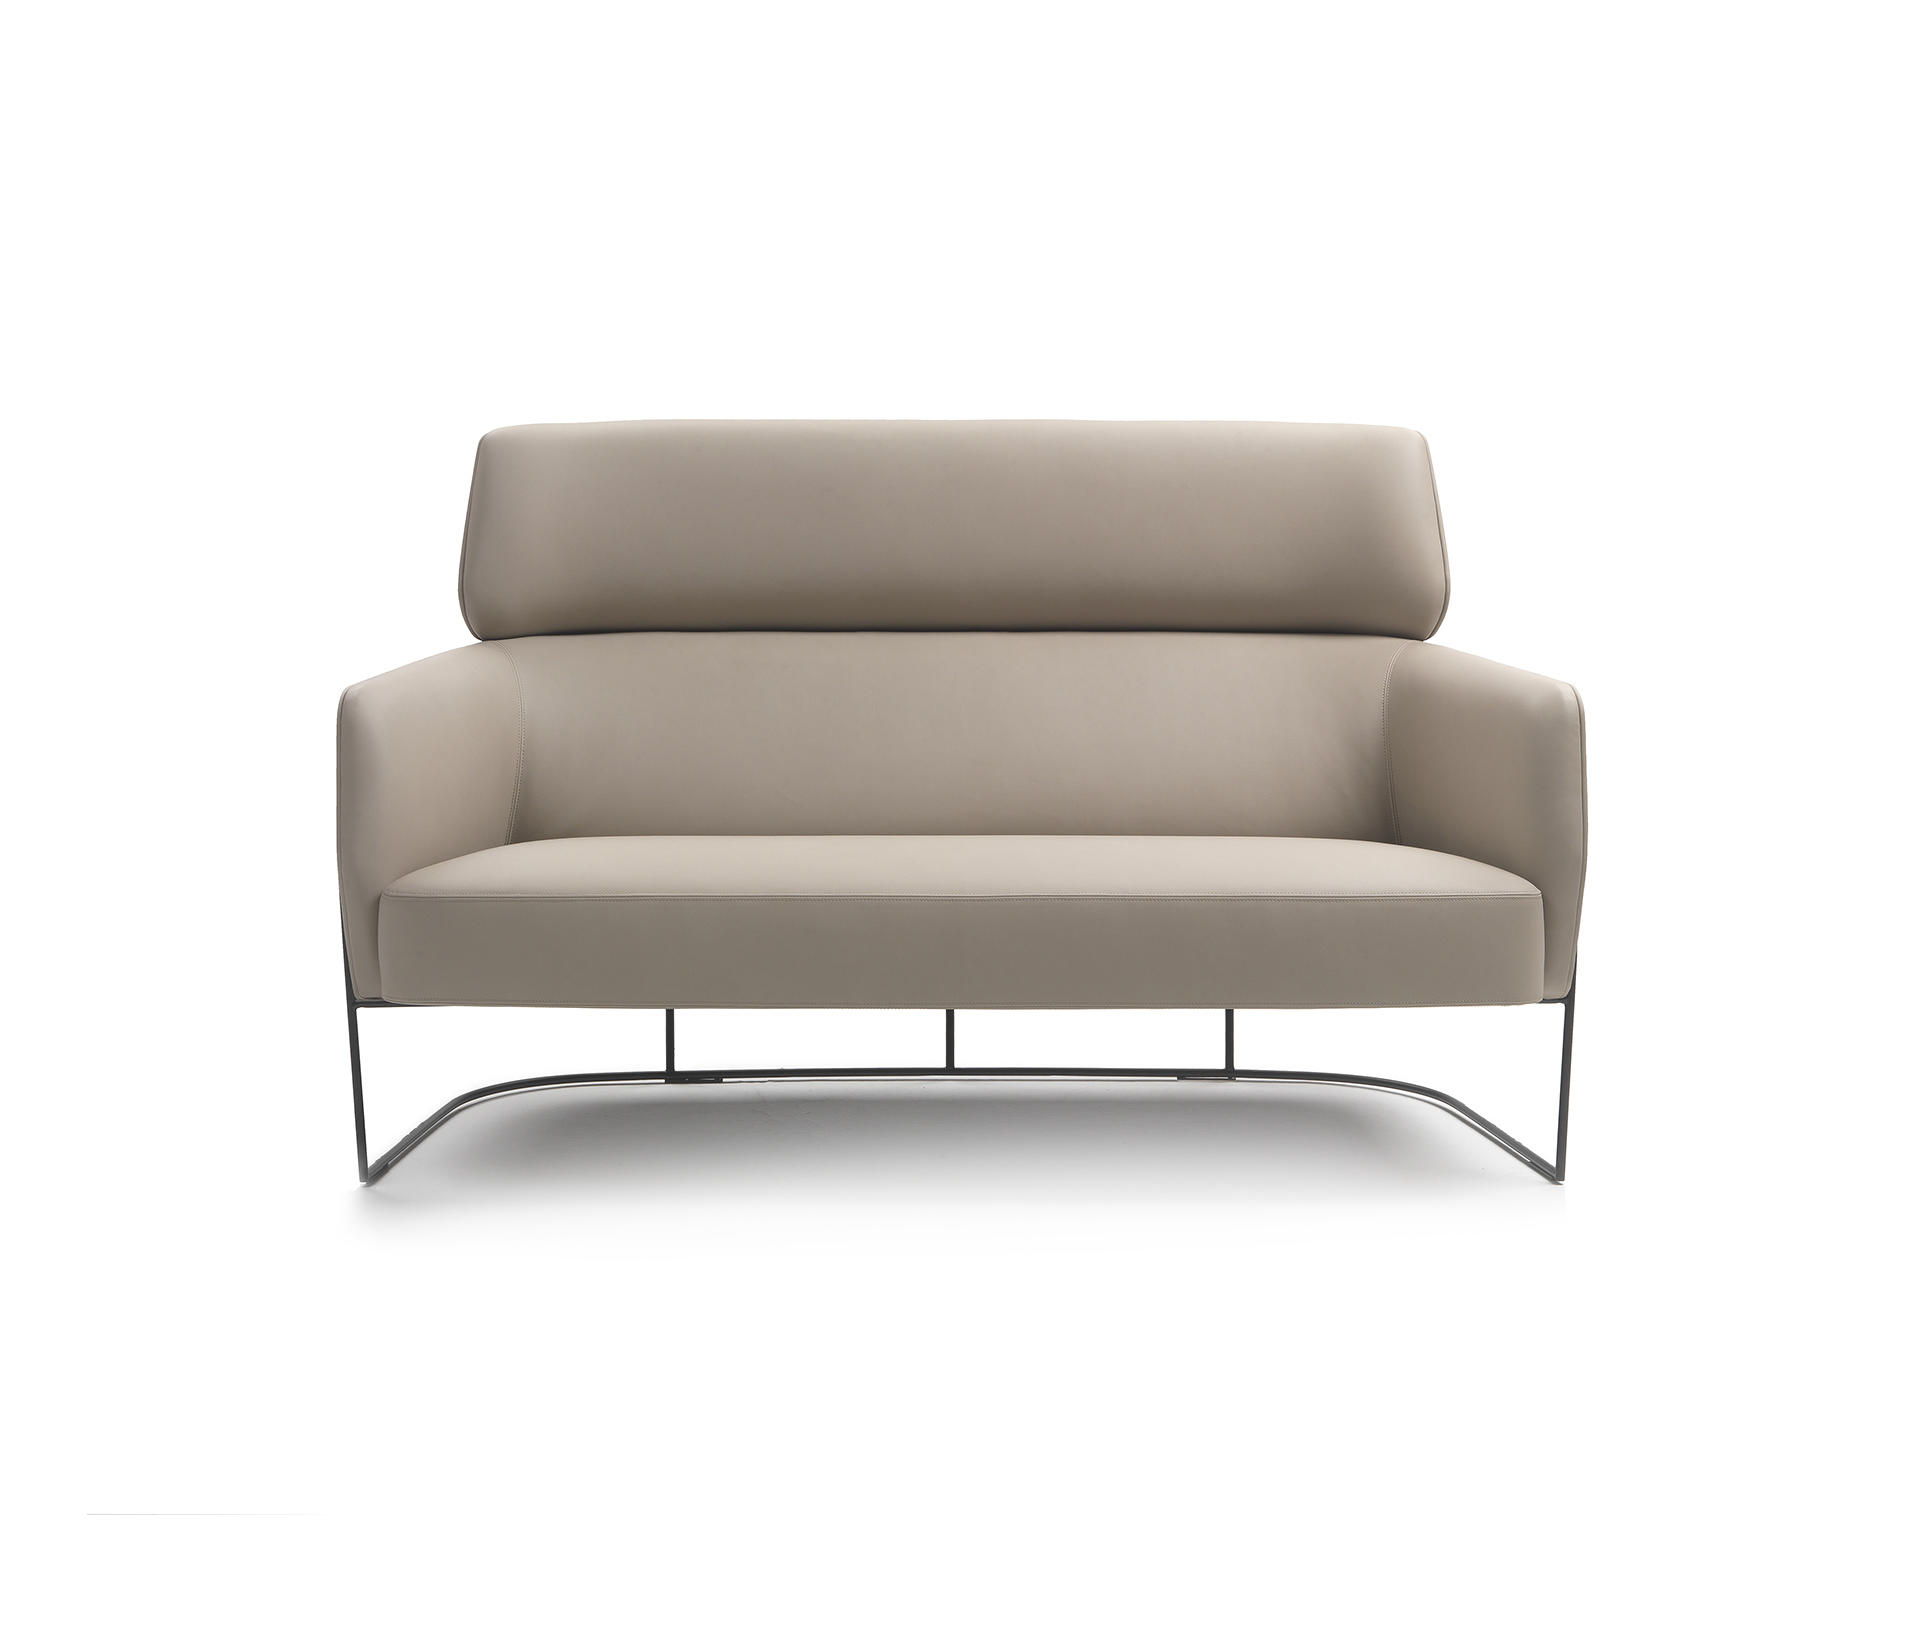 NEST - Sofas from Marelli | Architonic